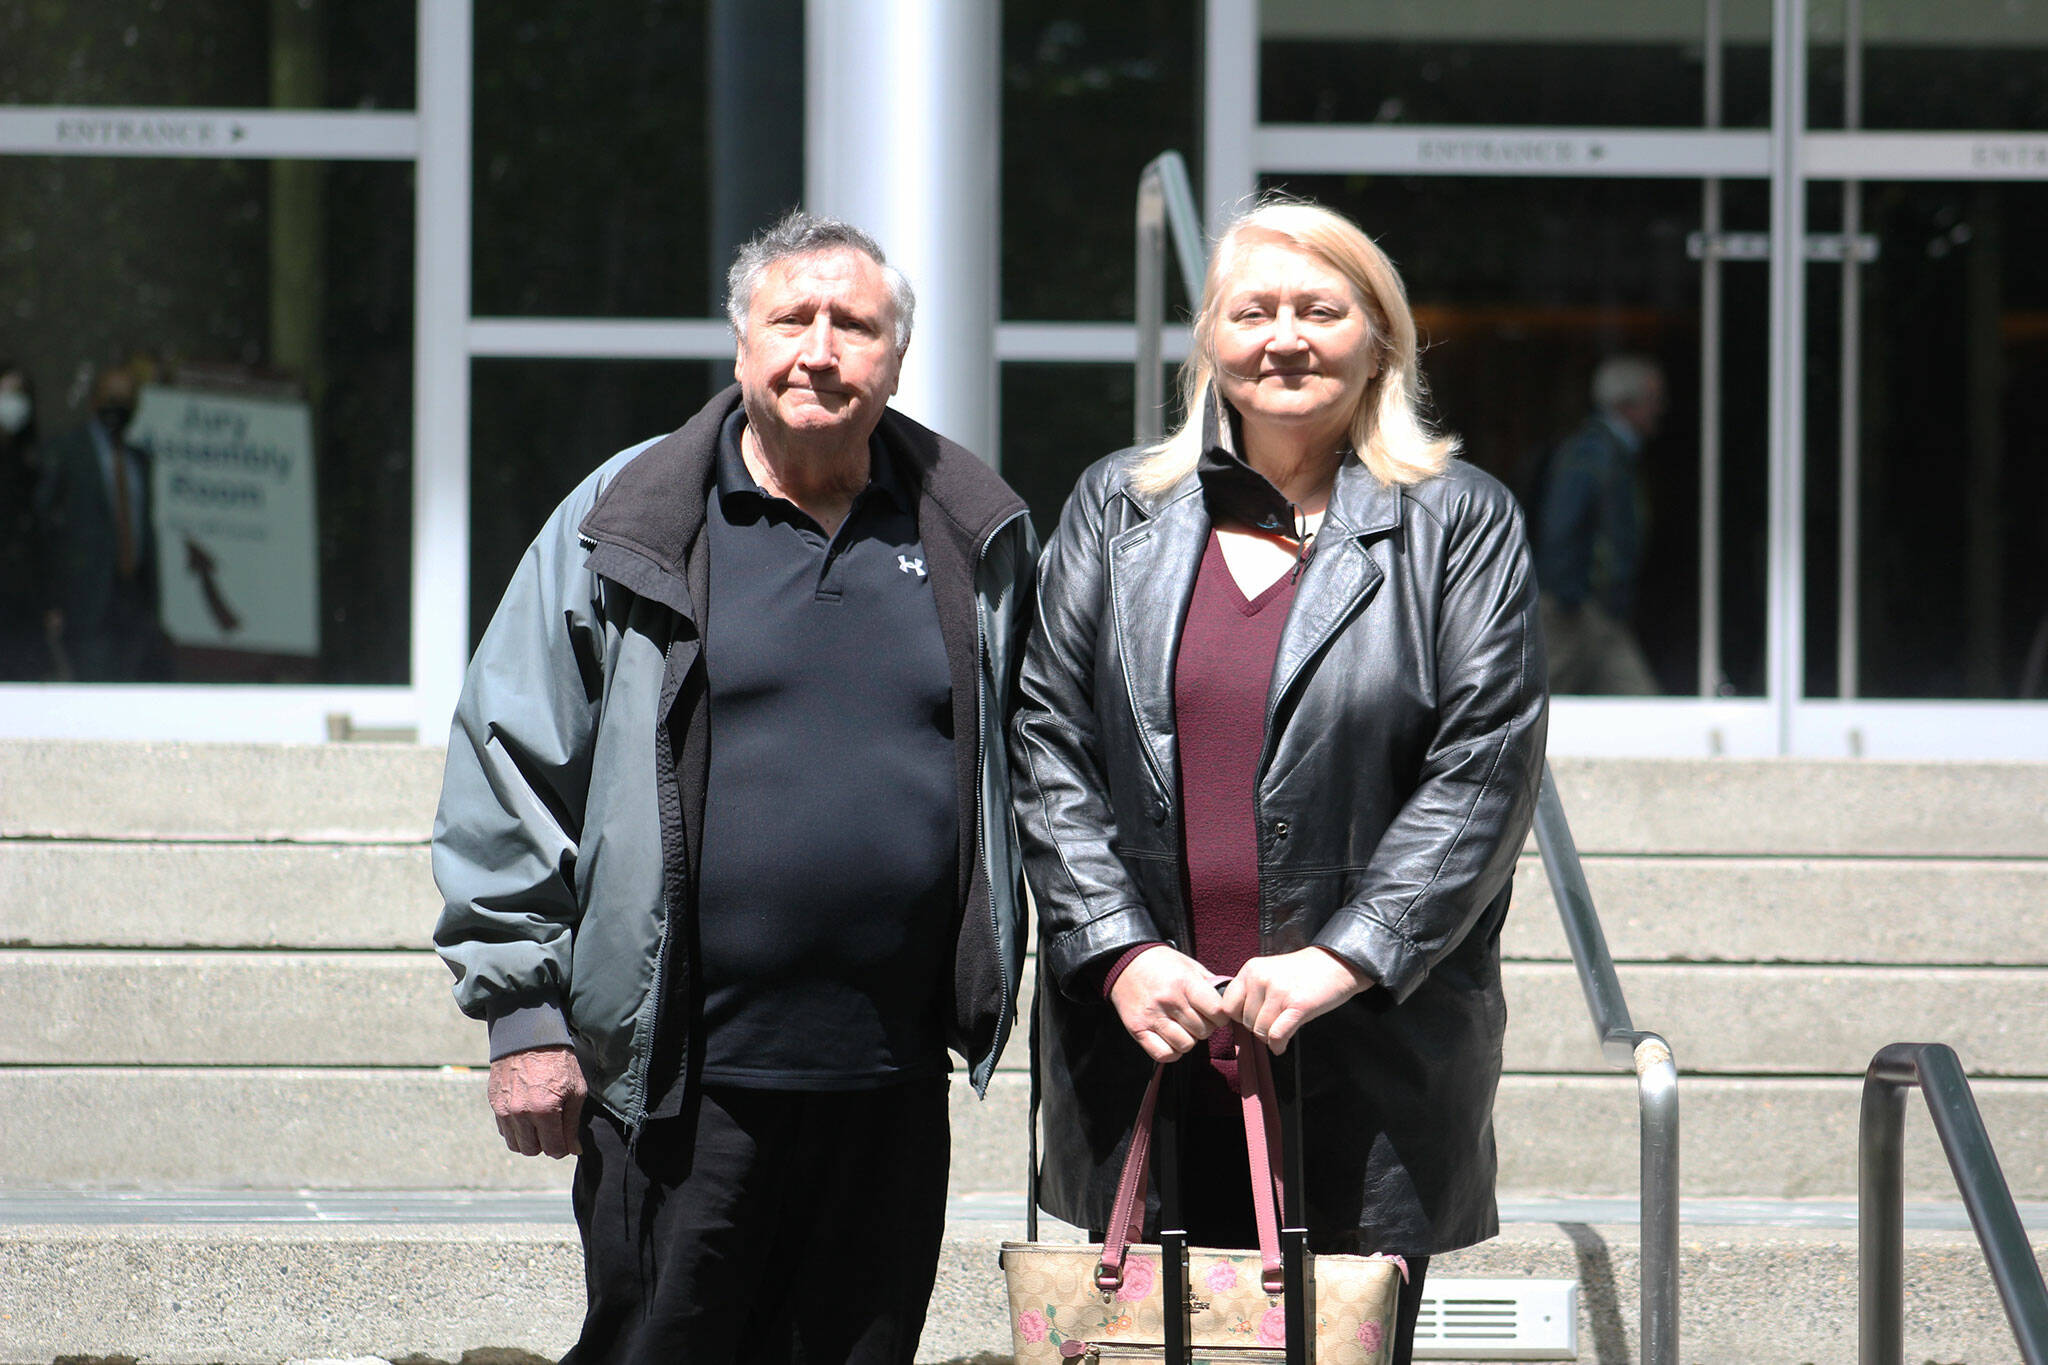 Allan “Benny” and Joann Thomas on the front steps of the federal court building in Seattle. Photo by Ray Miller-Still